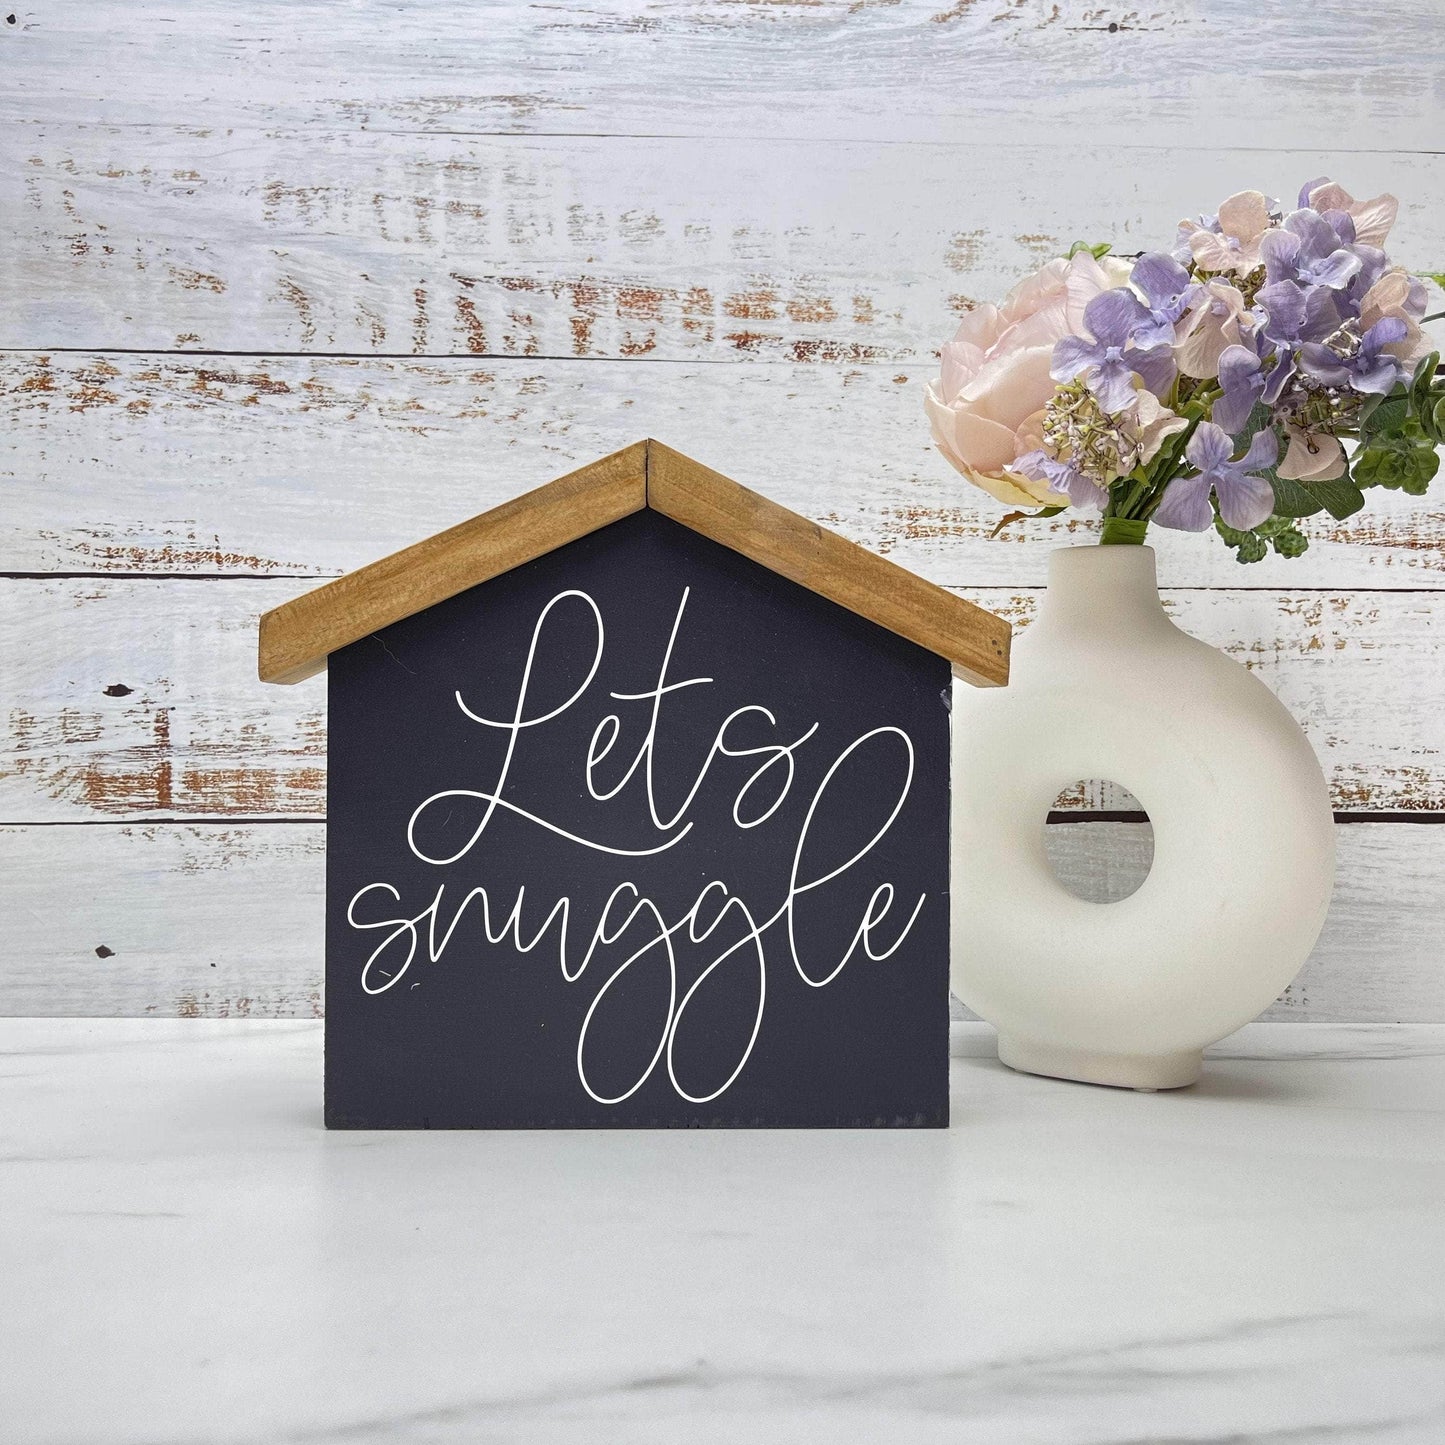 Lets snuggle House wood sign, love sign, couples gift sign, quote sign, home decor